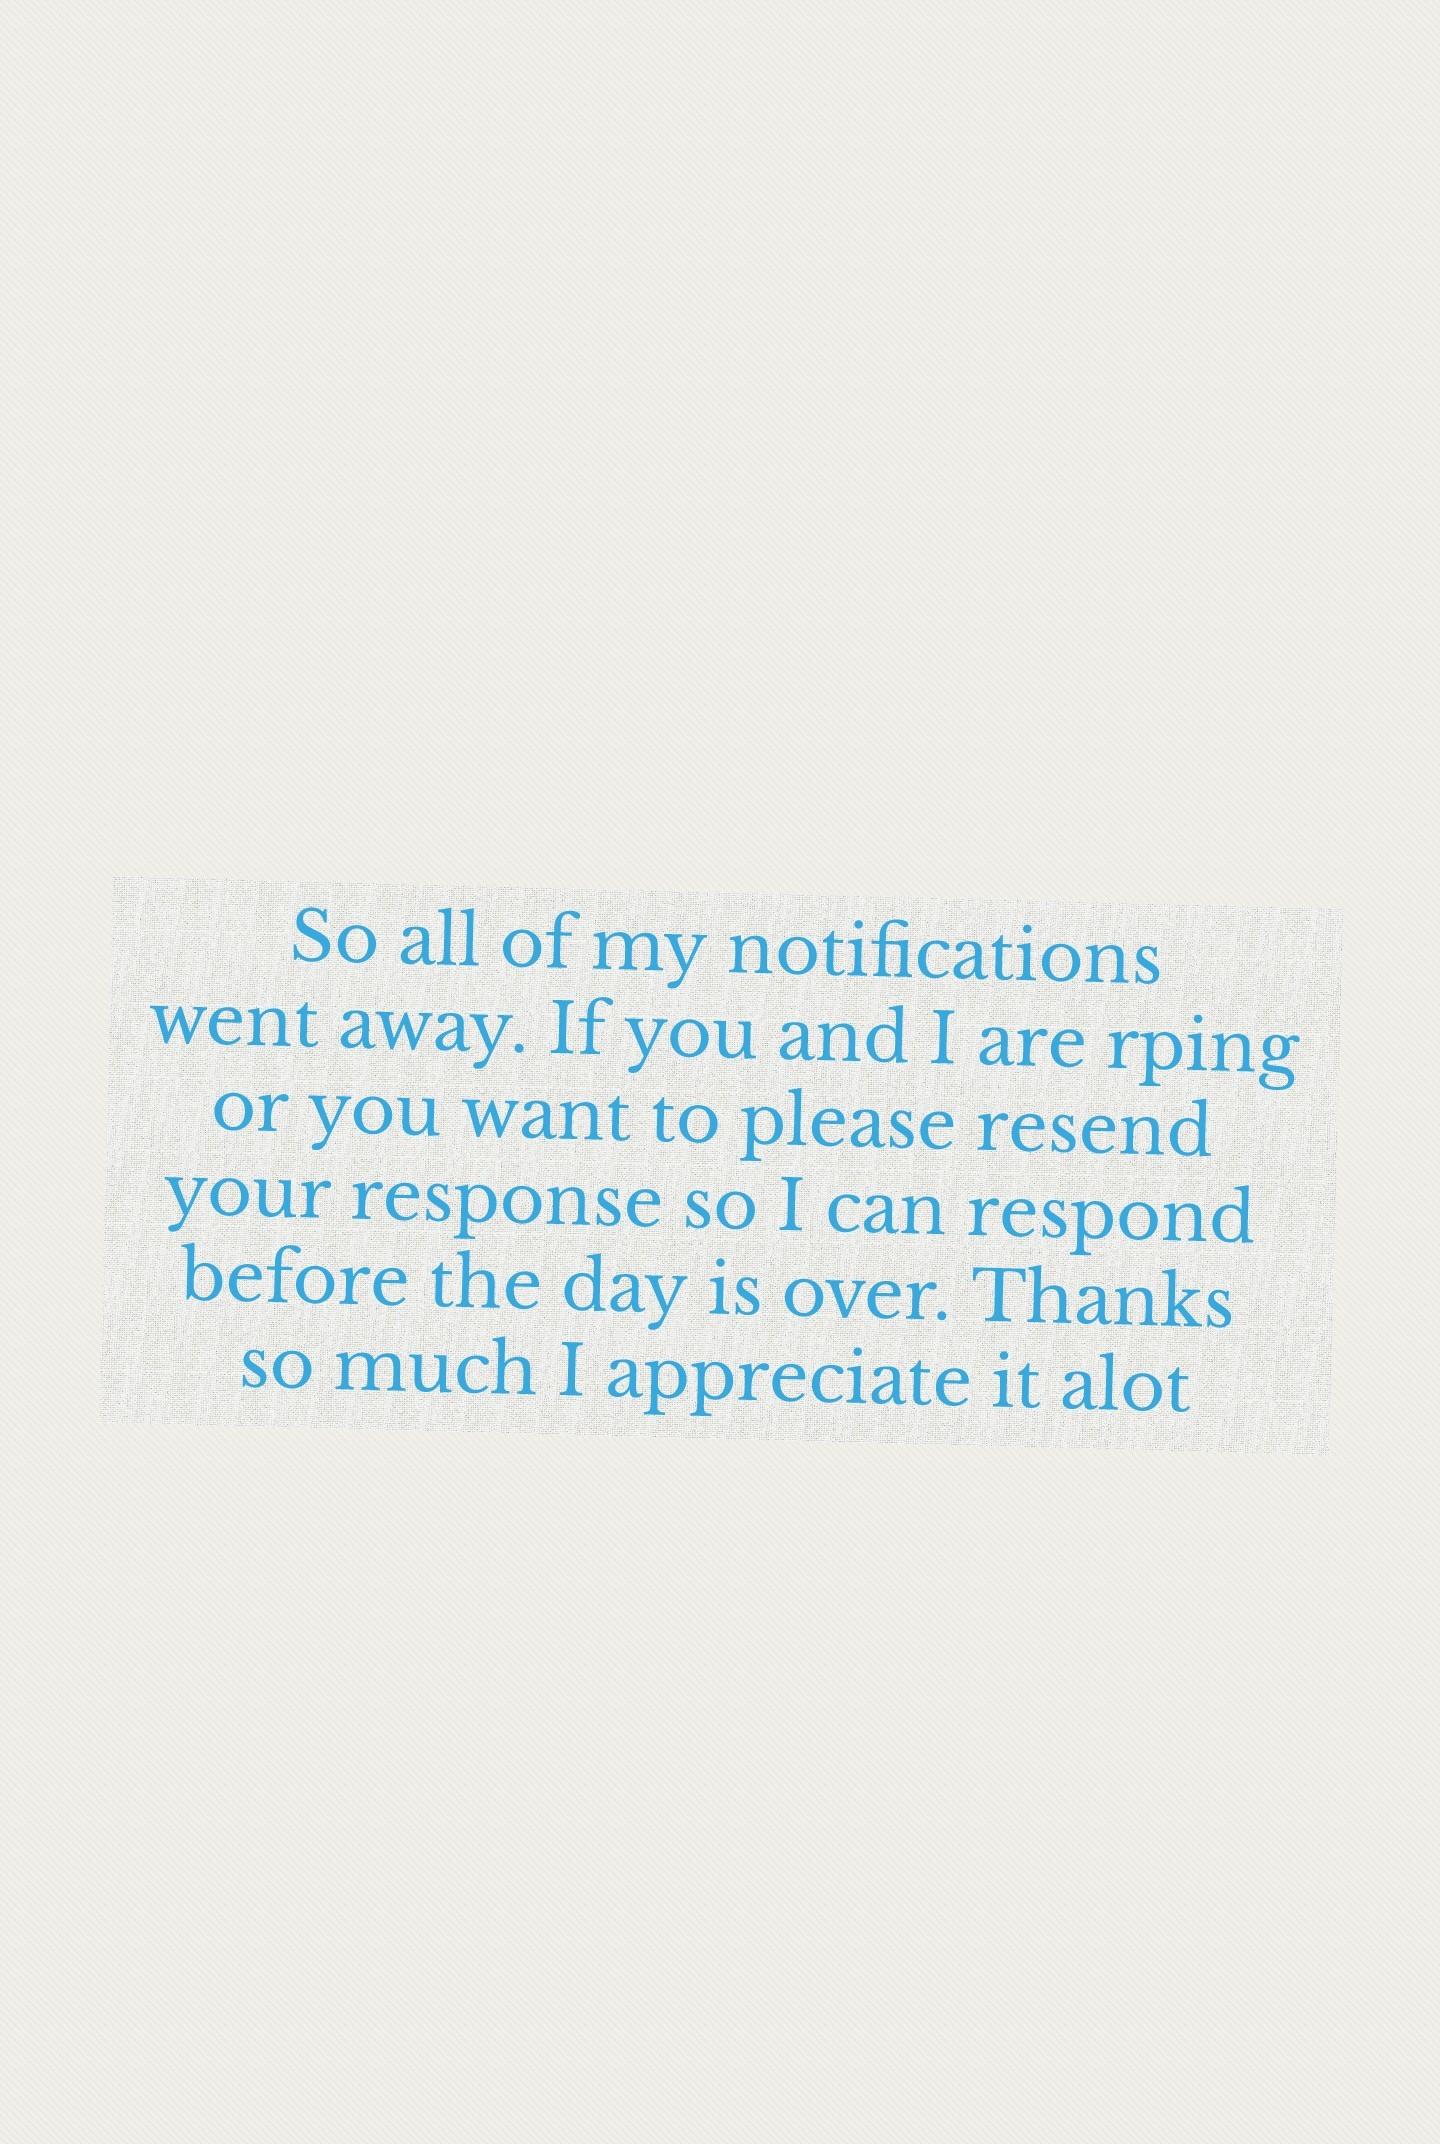 So all of my notifications
went away. If you and I are rping
or you want to please resend 
your response so I can respond 
before the day is over. Thanks 
so much I appreciate it alot